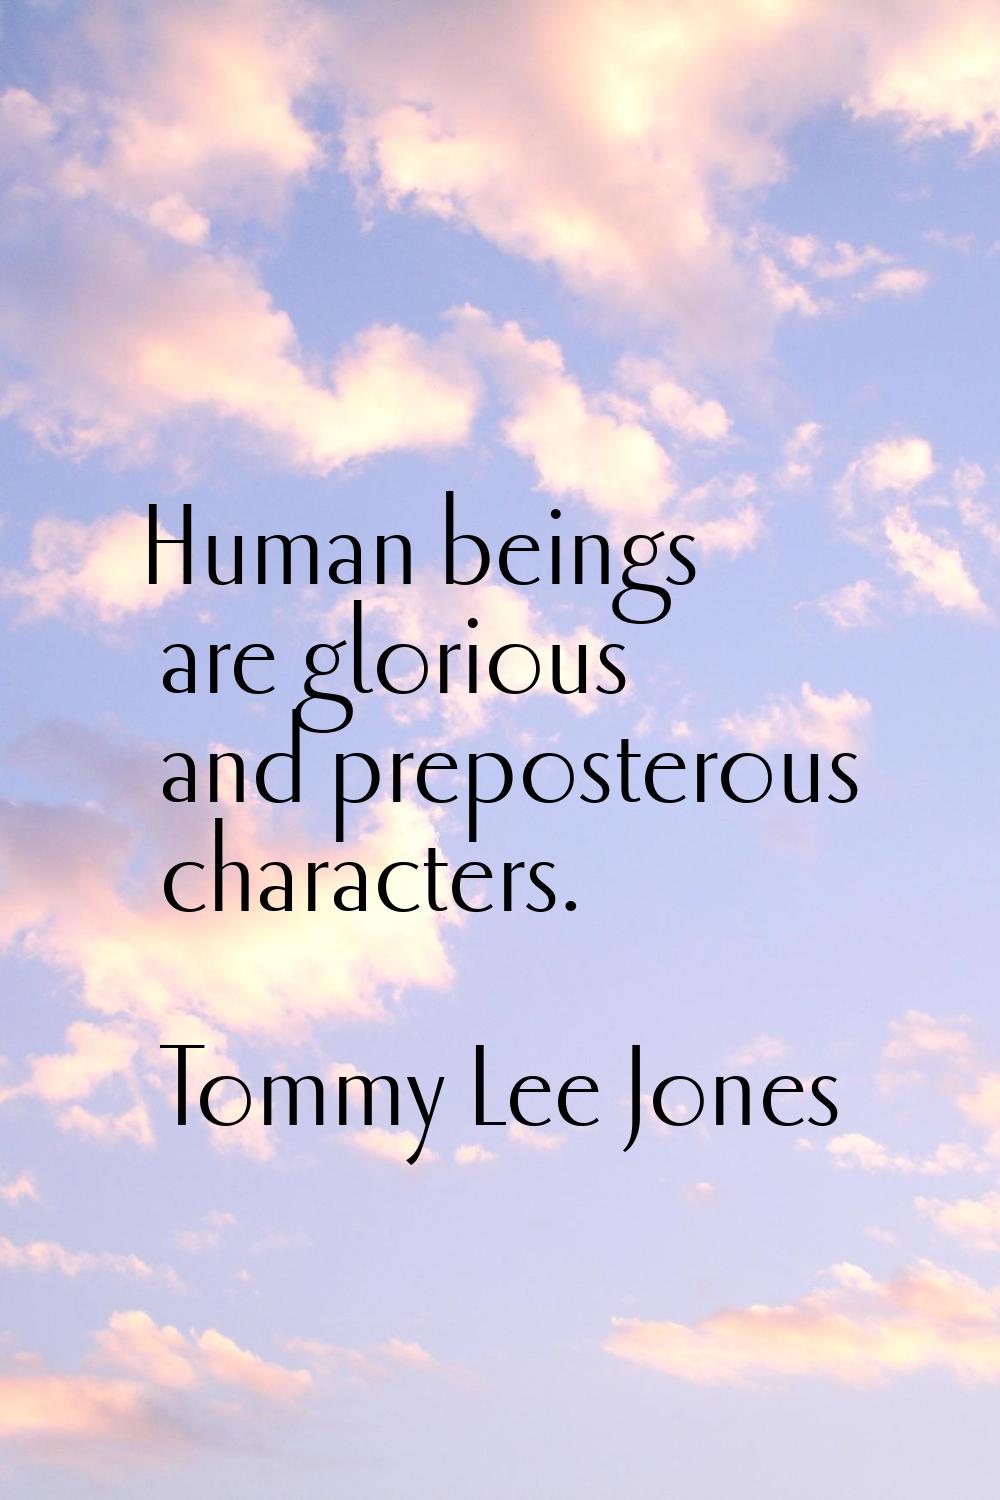 Human beings are glorious and preposterous characters.